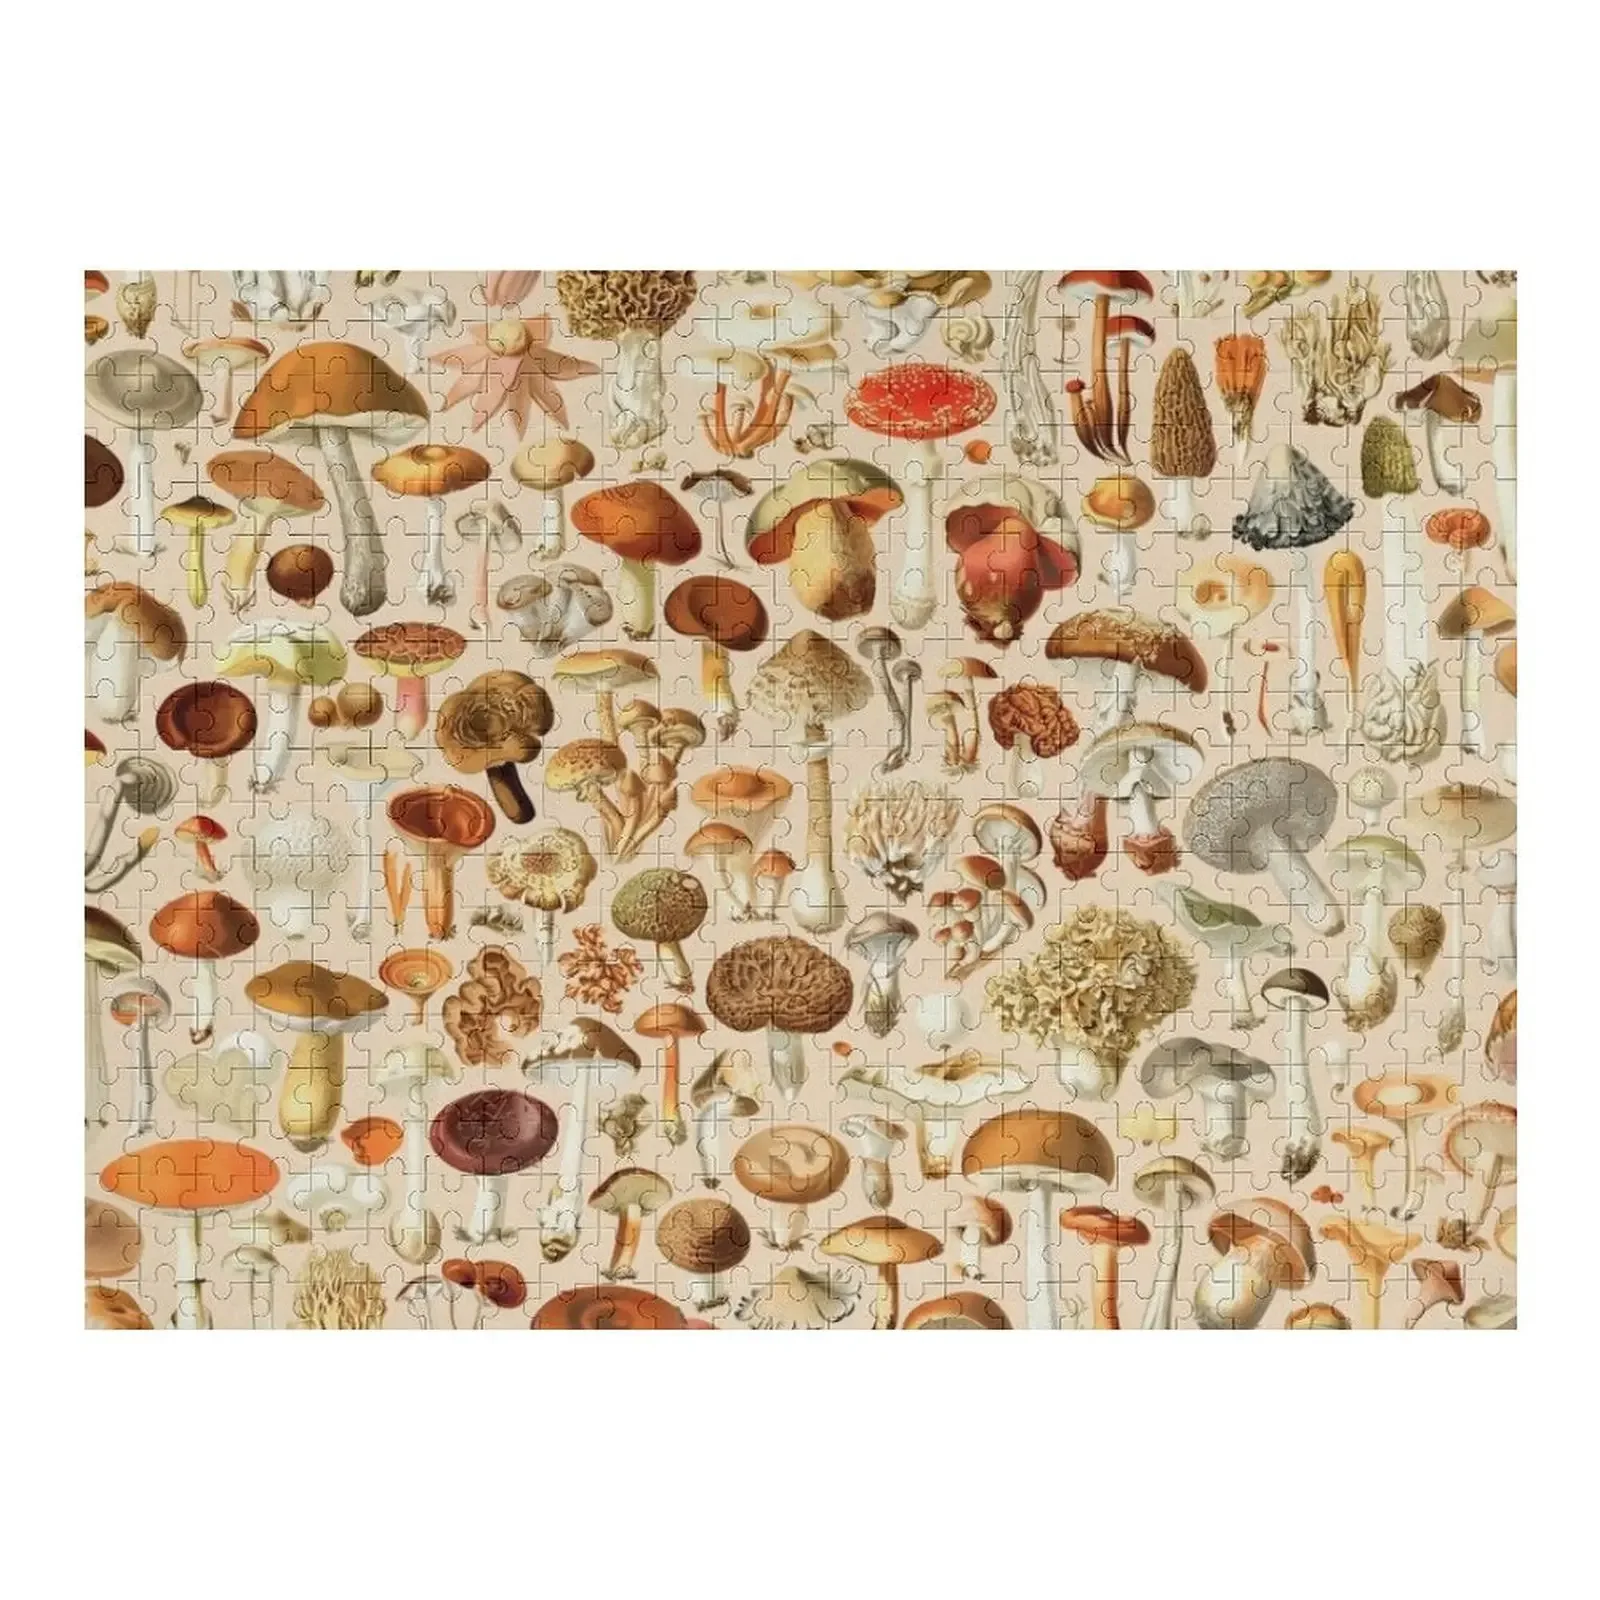 Vintage Mushroom Designs Collection Jigsaw Puzzle Novel Toys For Children 2022 Personalized Child Gift Picture Puzzle